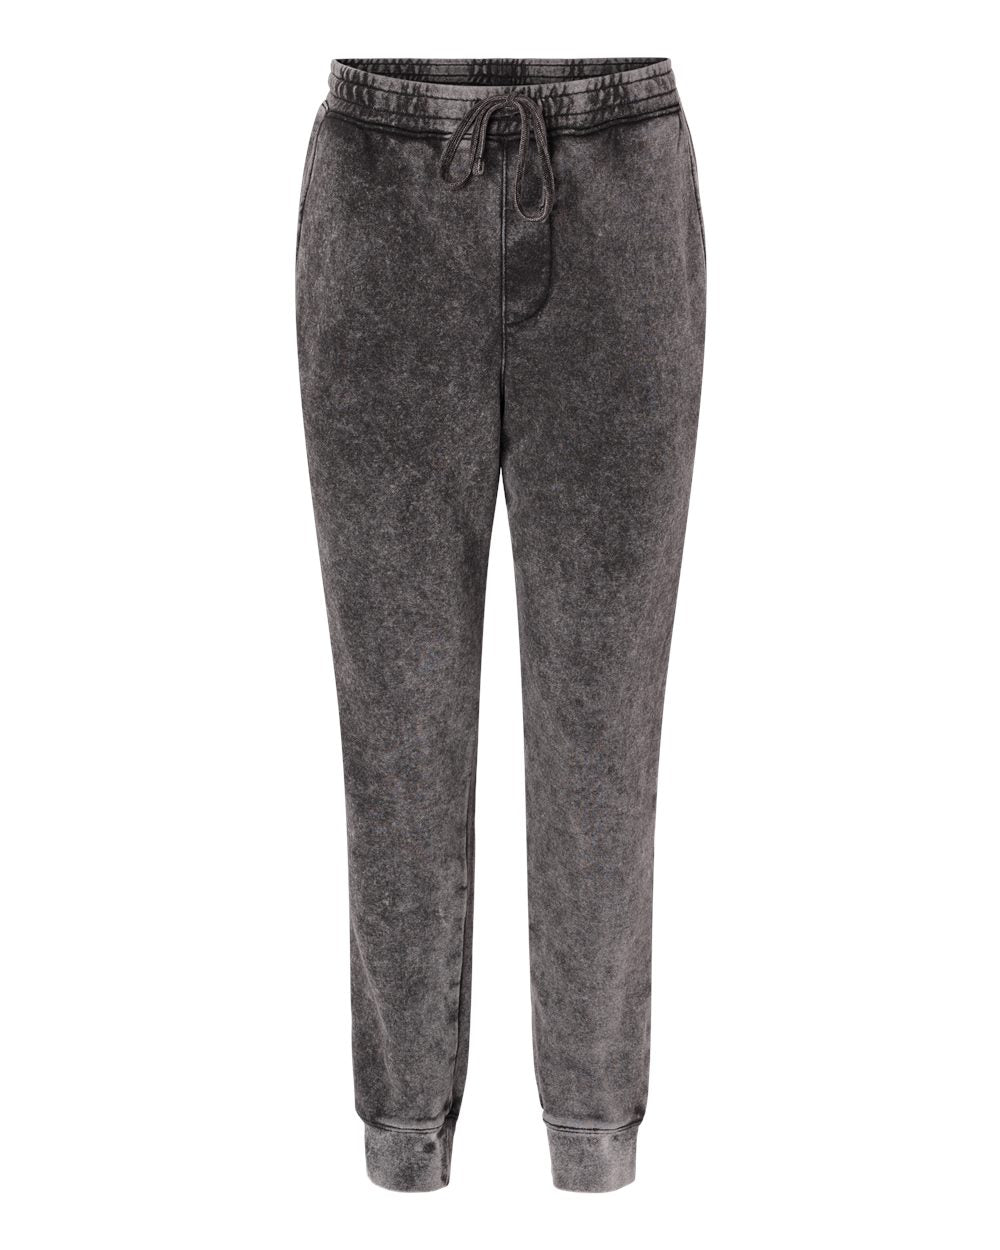 Independent Trading Co. - Mineral Wash Fleece Pants